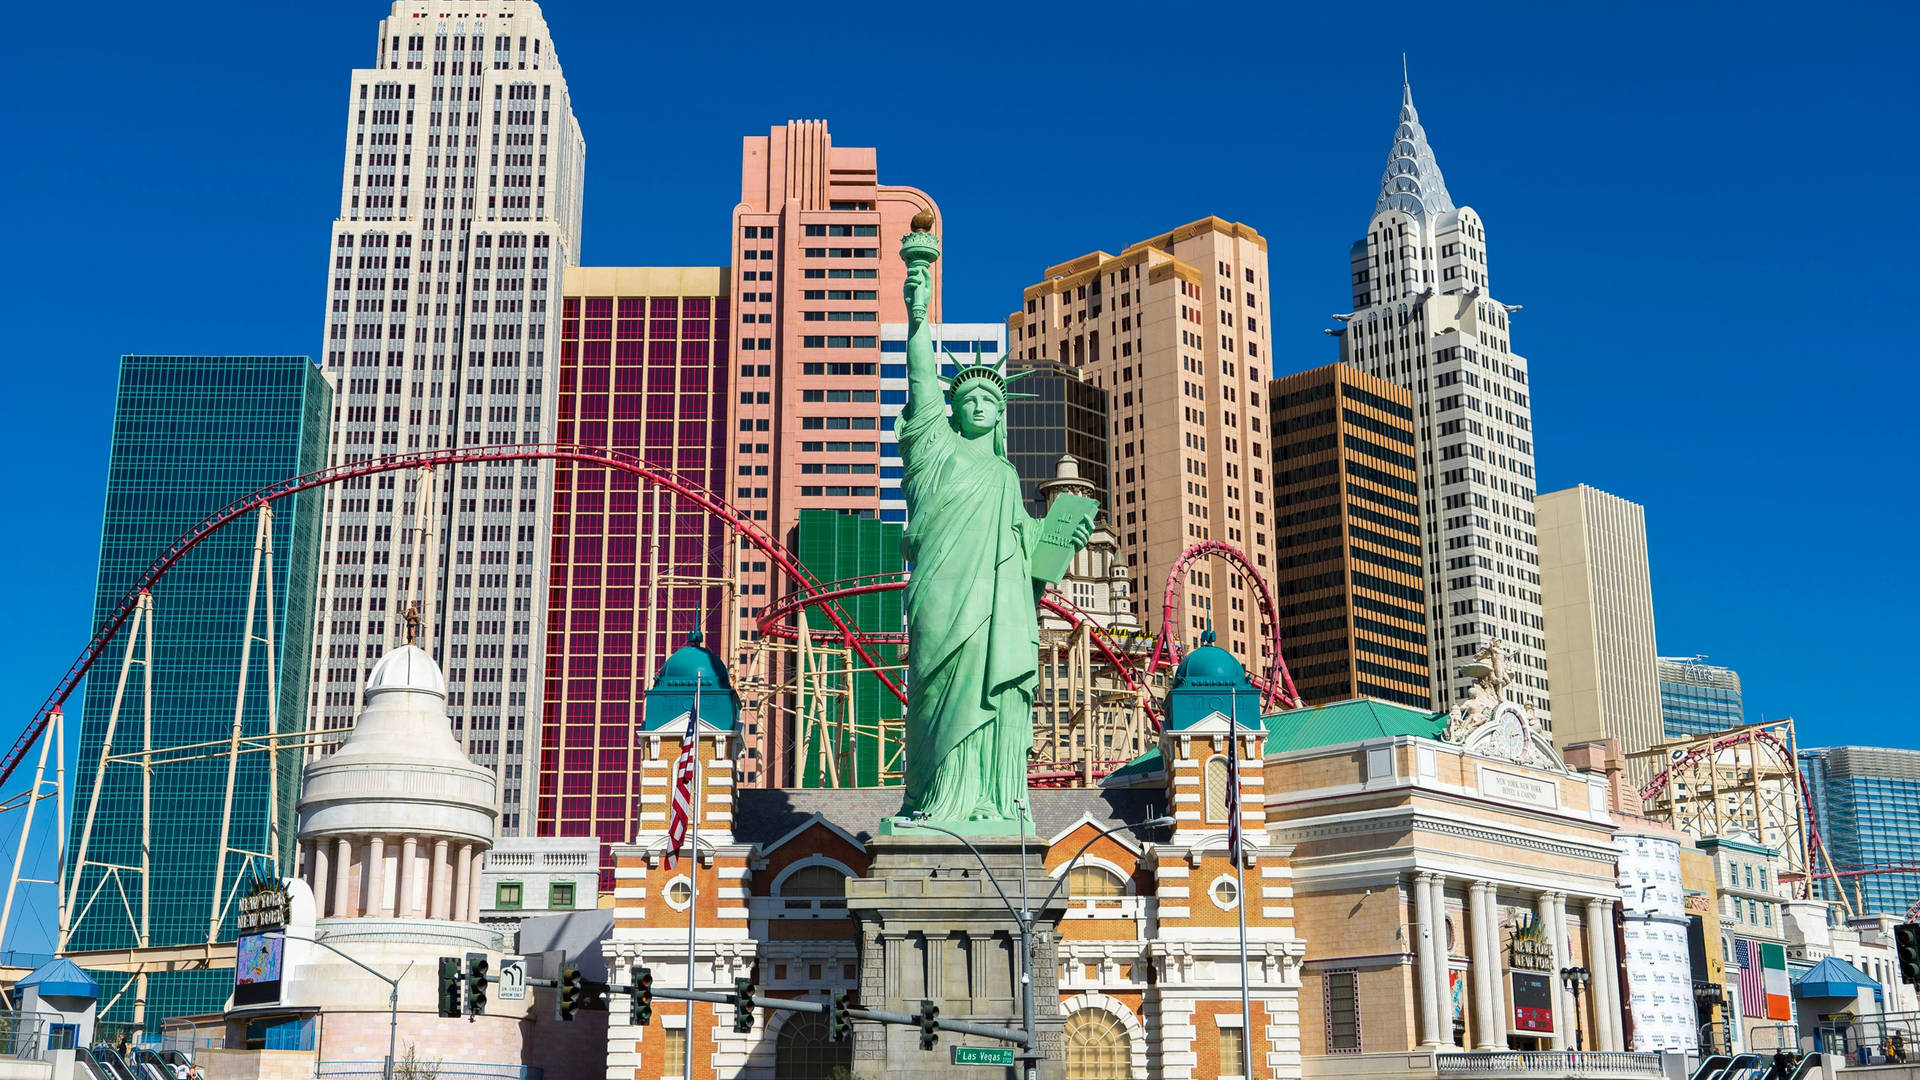 Caption: Iconic View Of The New York-new York Hotel In Las Vegas Background